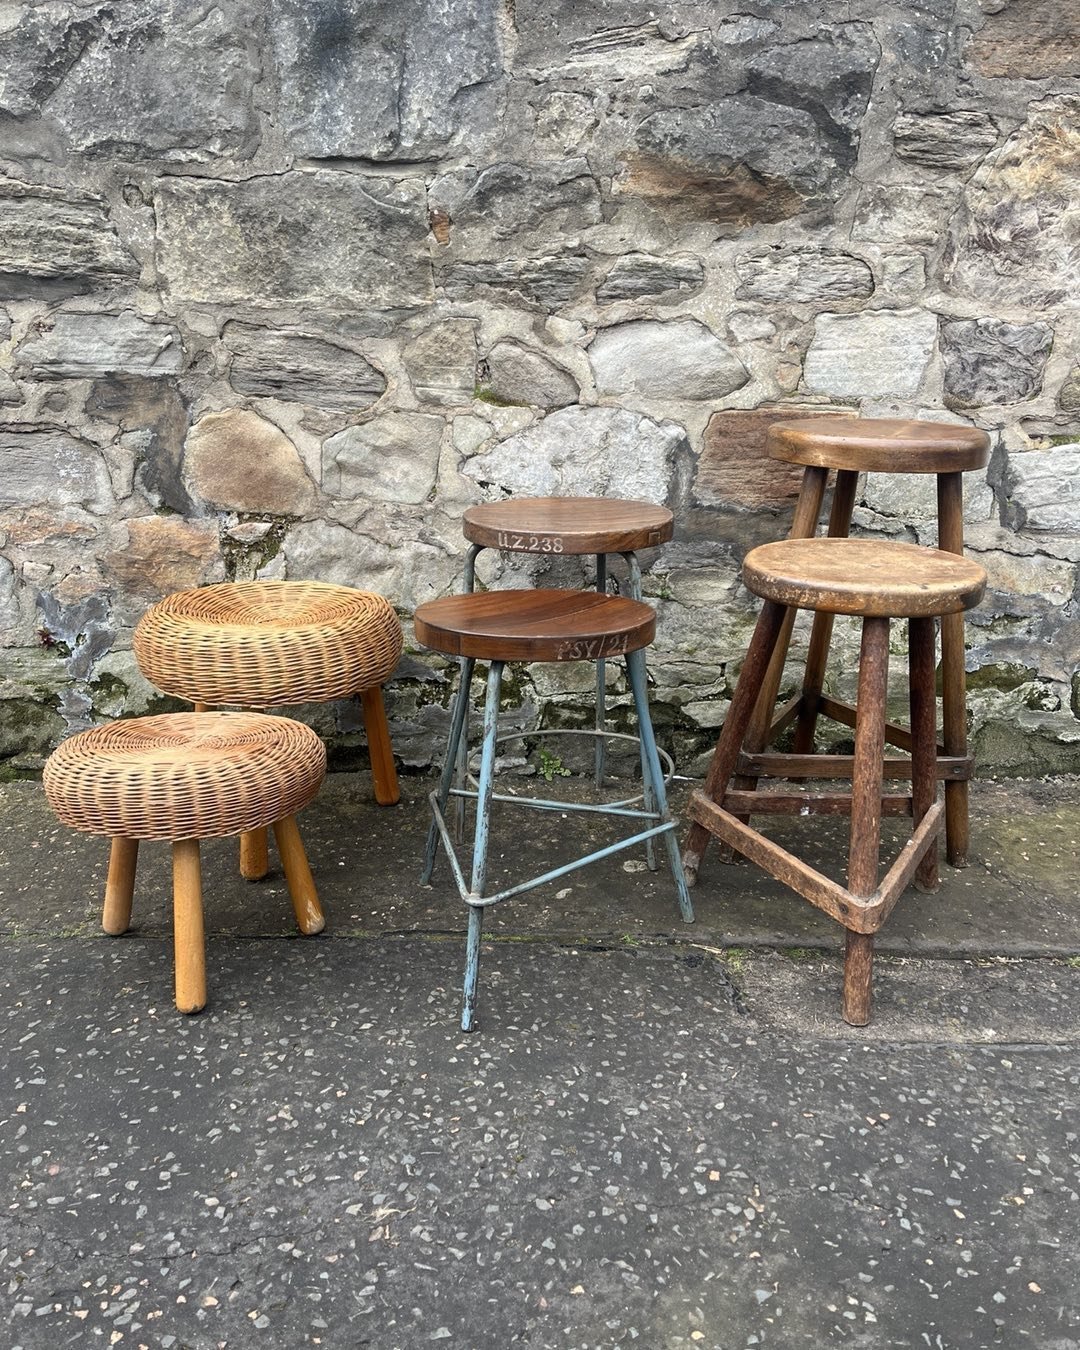 Collection of Stools.All Available to Purchase.Worldwide Shipping.Dm for prices#french#stools#original#rustic#patina#mcm#artisan#rattan#wicker#sculpture#interiorstyle#decor#decorativemodern#scottcampbellmodern#forsale